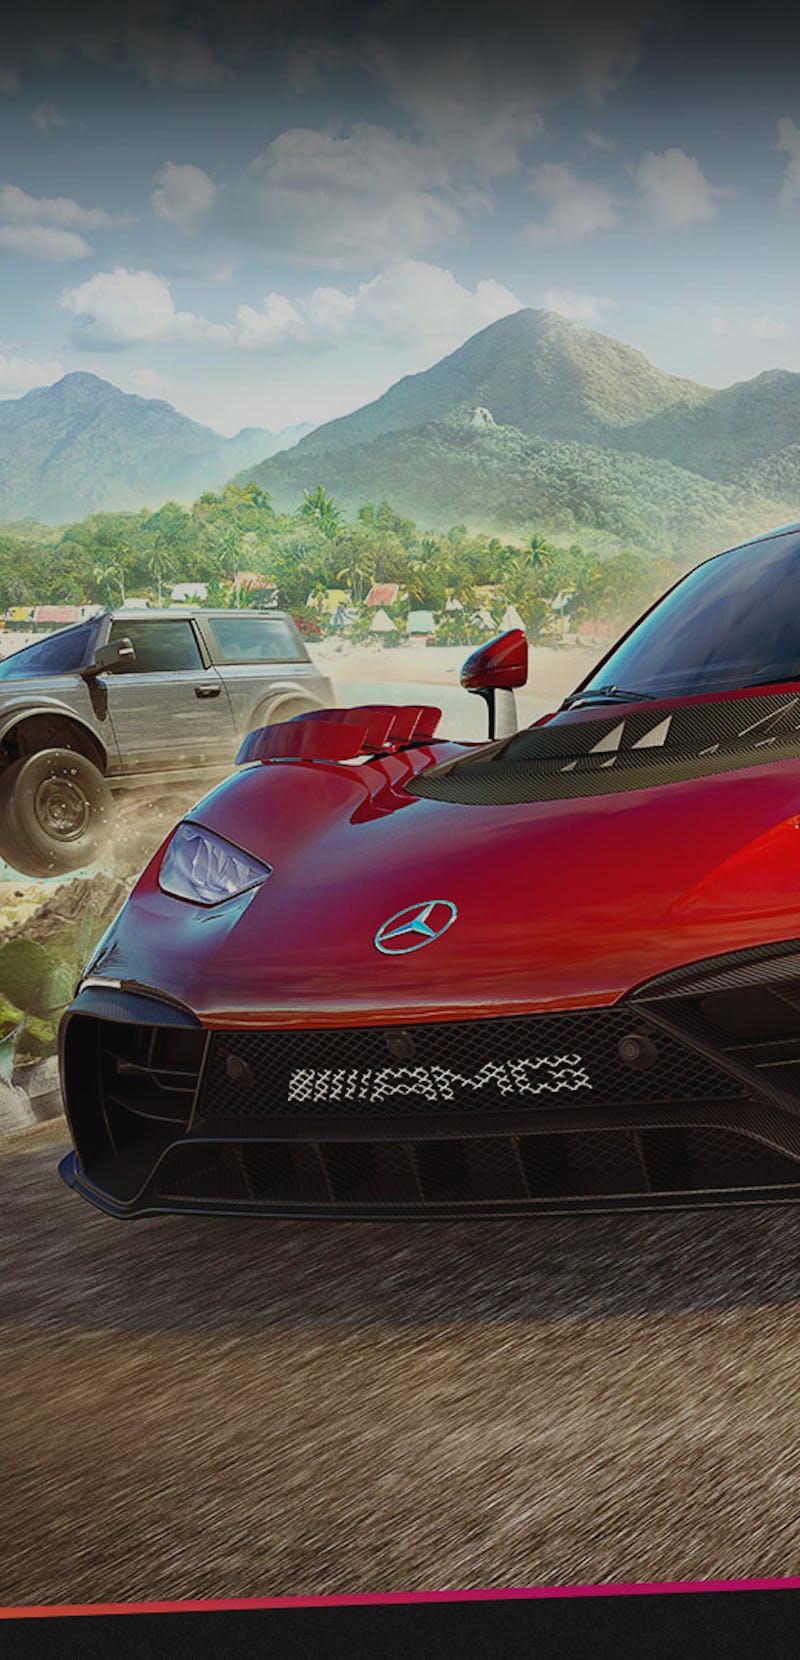 A screenshot from the Forza Horizon 5 video game